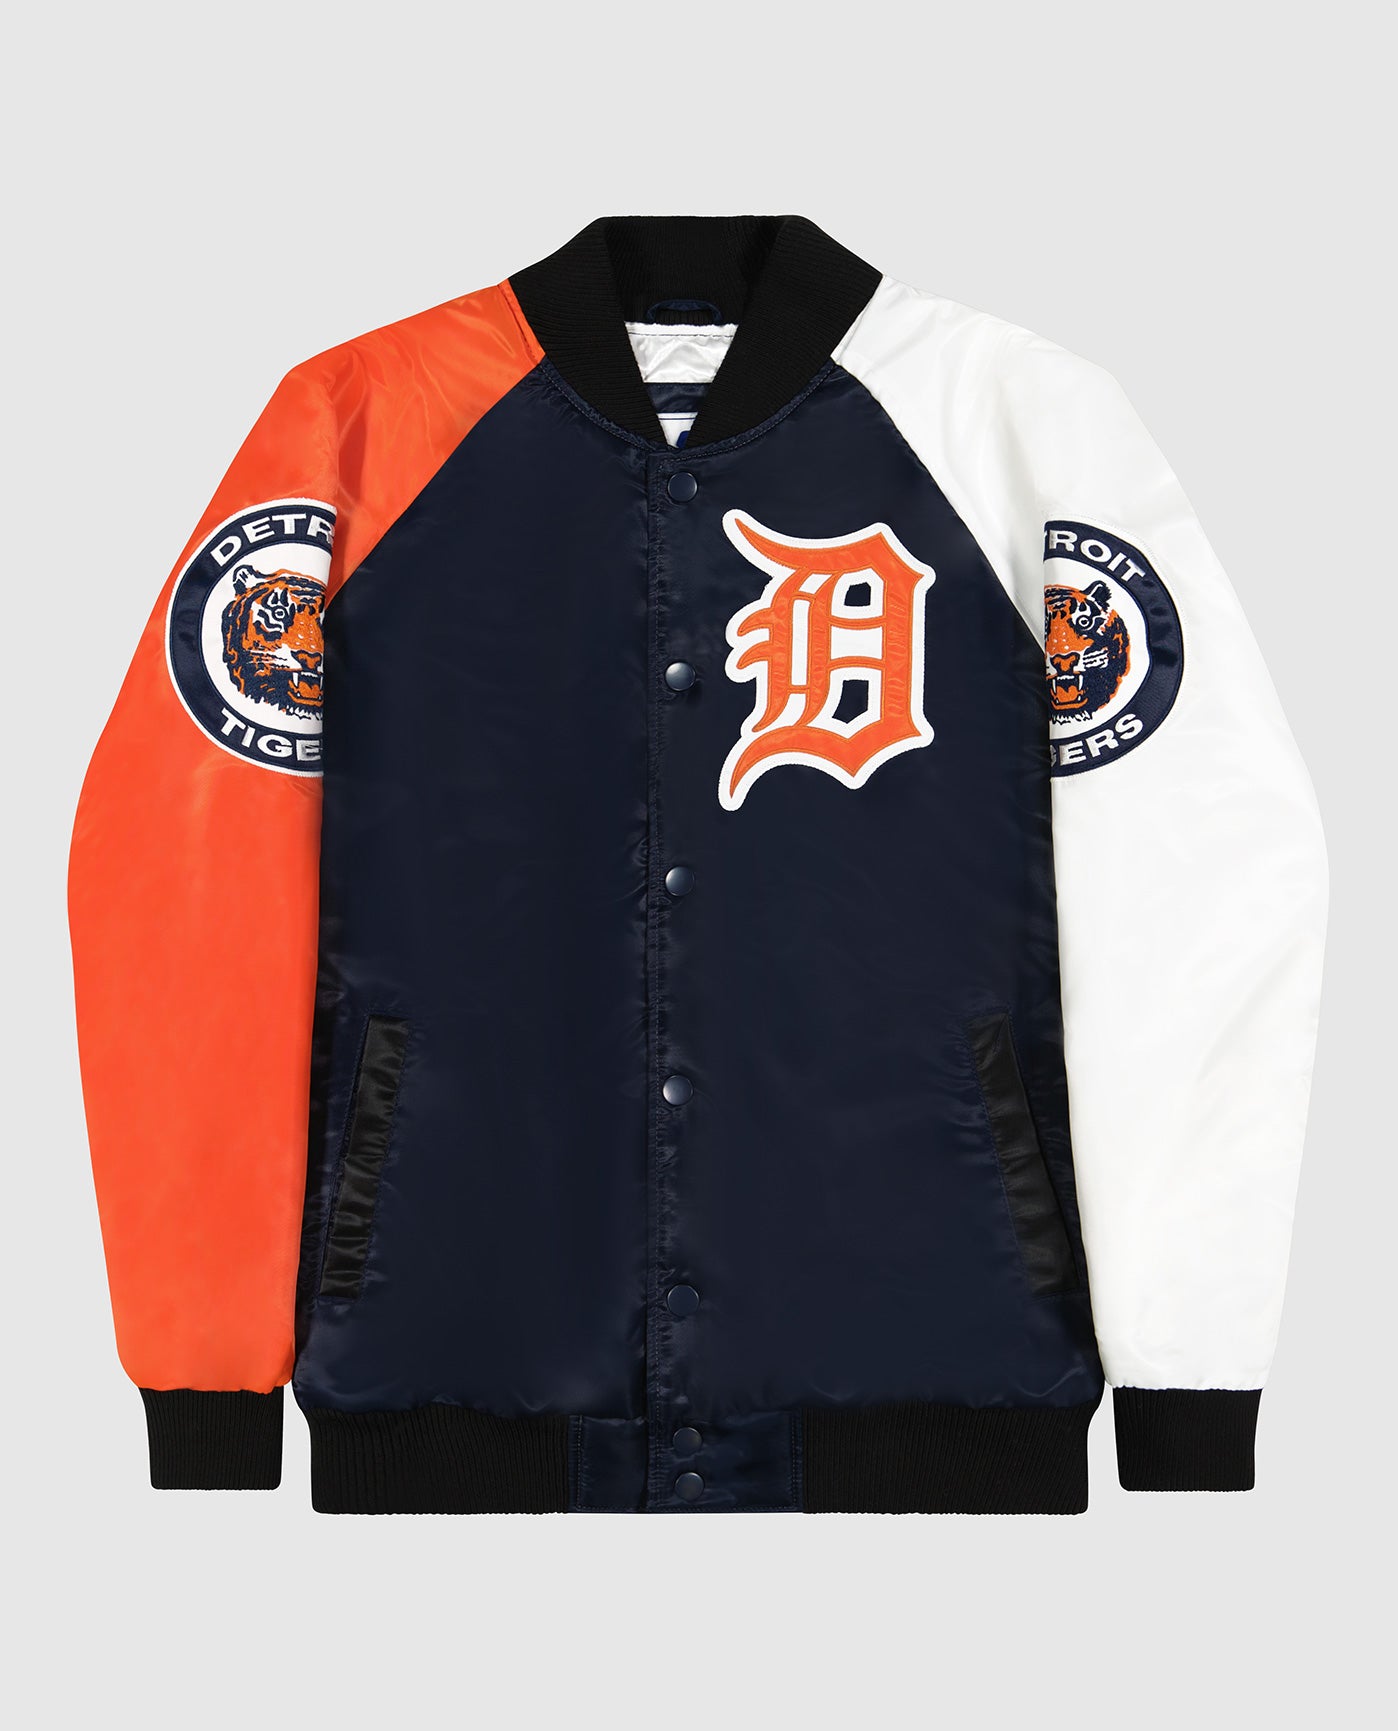 Detroit Tigers Jacket - Free Shipping - Order Now